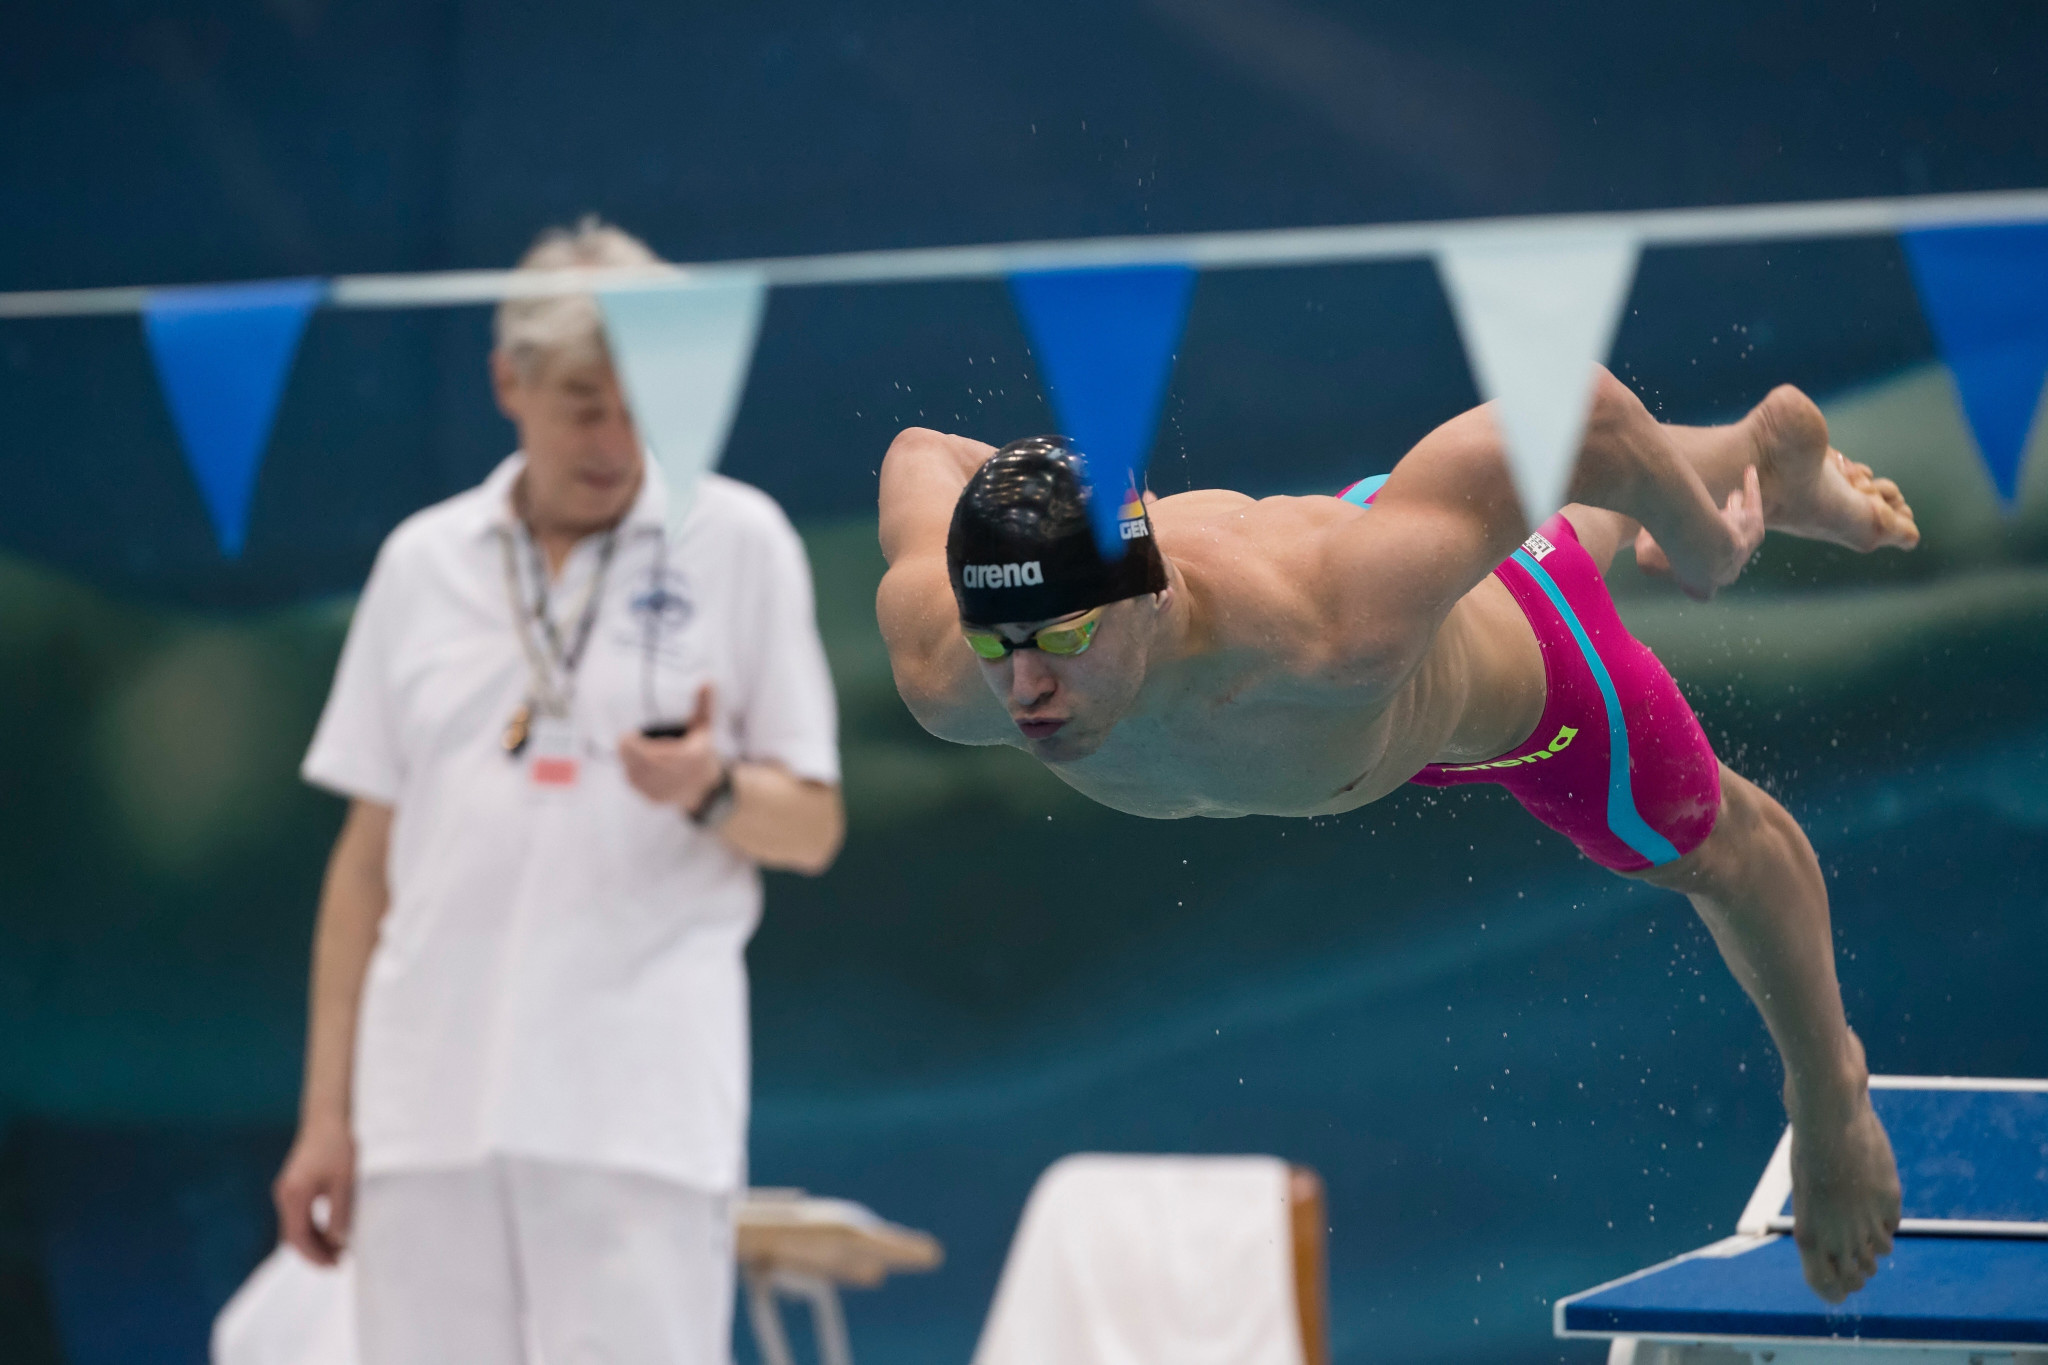 Alaa Maso is competing in the men's 50m and 100m freestyle competitions in Abu Dhabi ©FINA